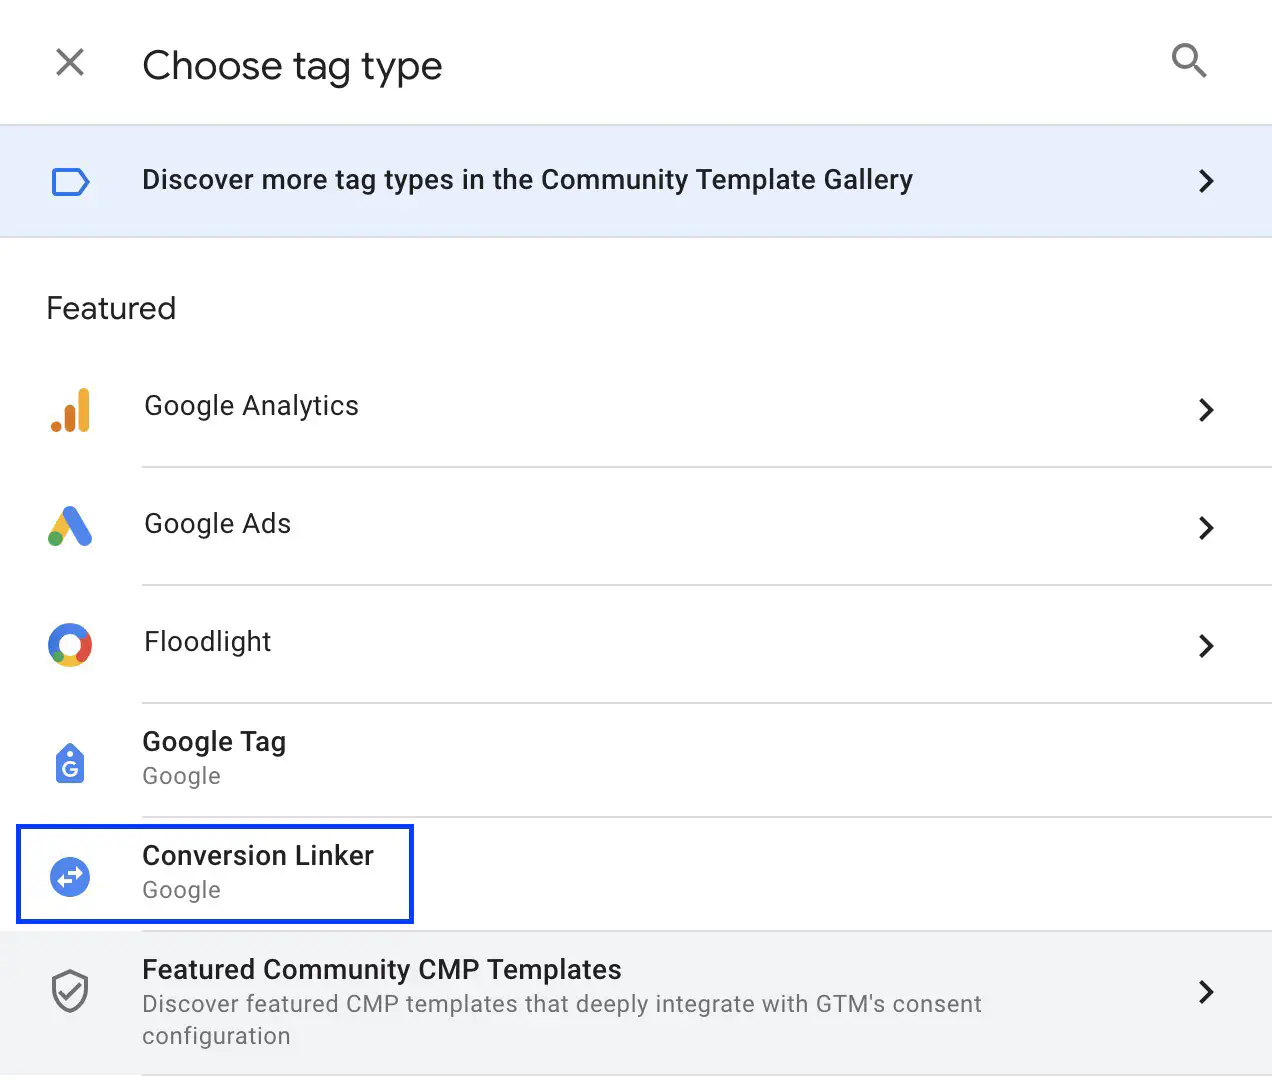 Conversion Linker tag on Google Tag Manager